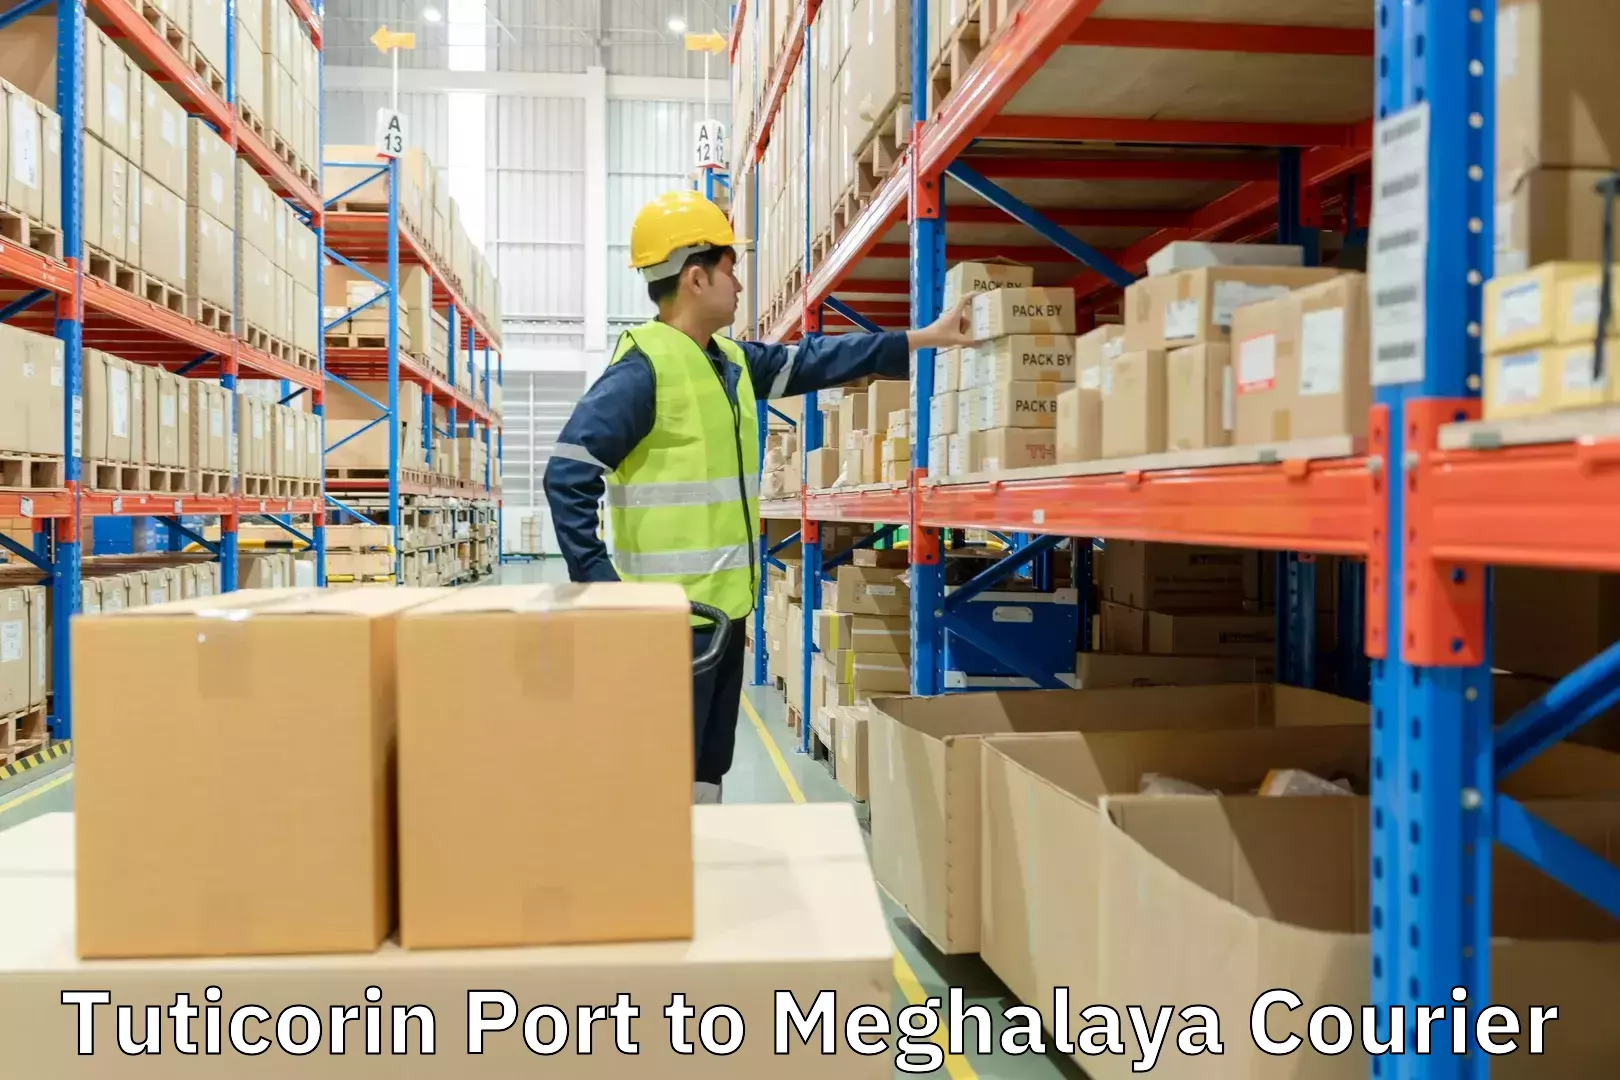 Specialized courier services Tuticorin Port to Meghalaya